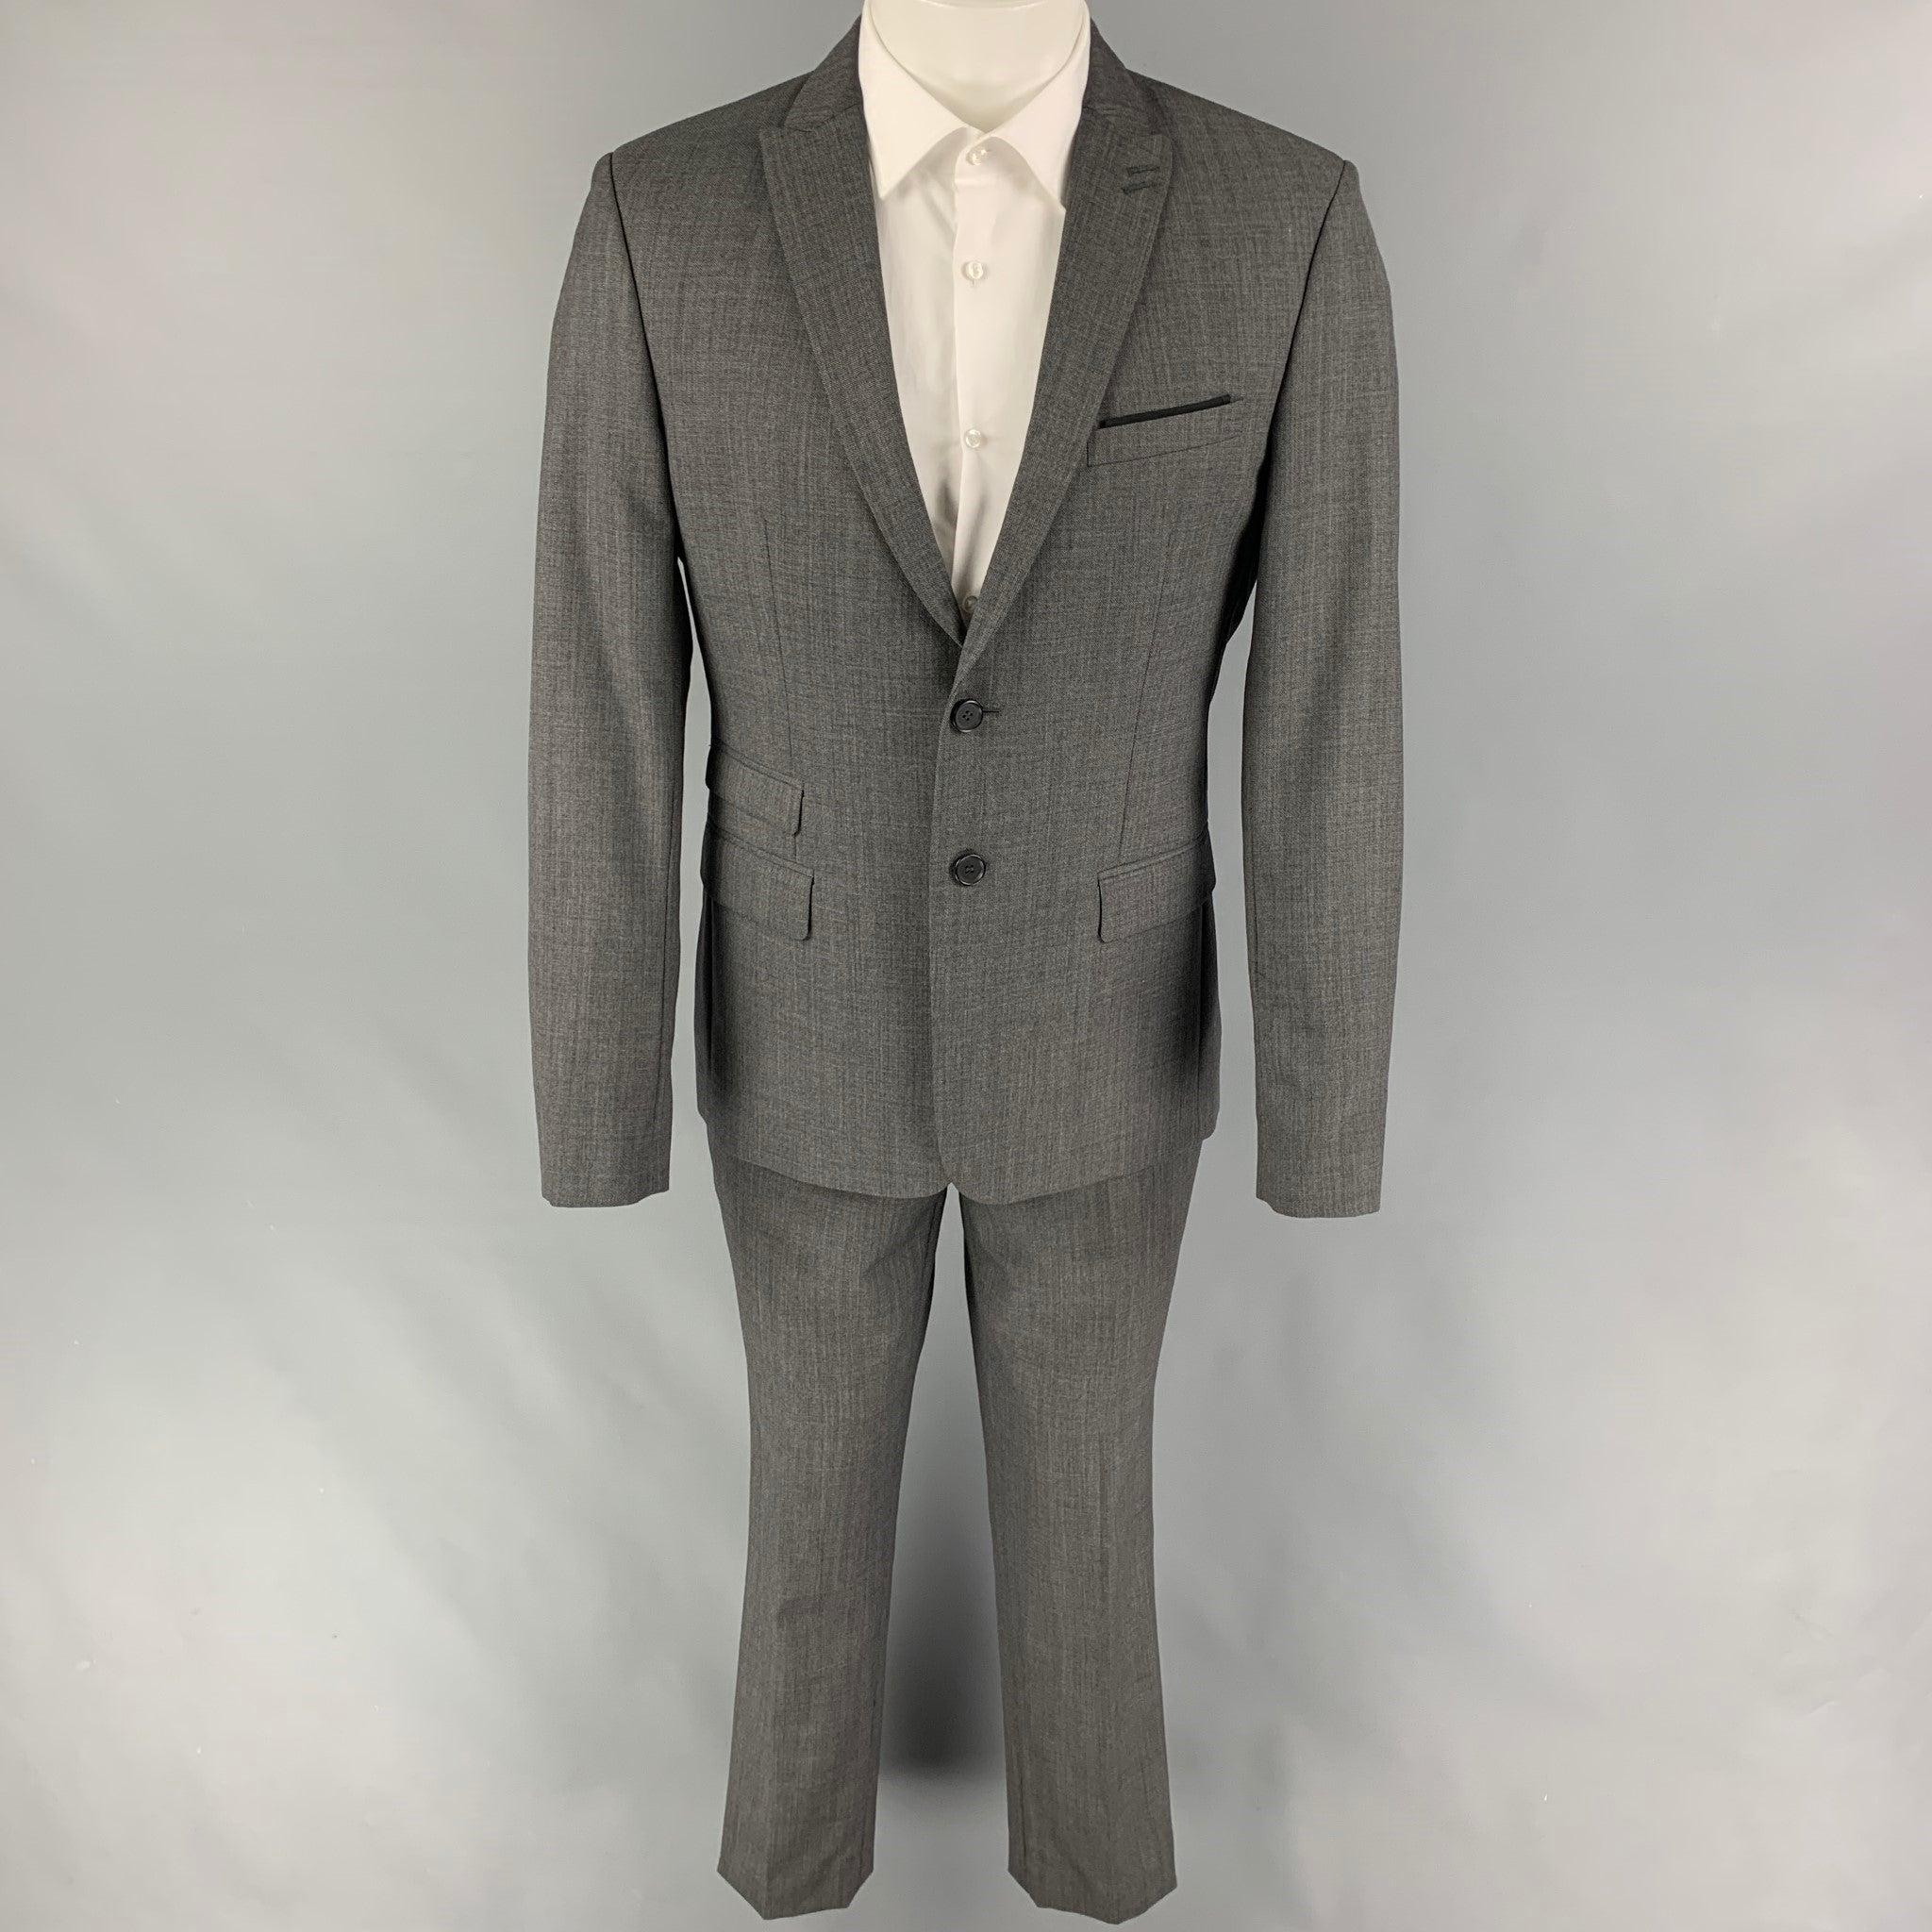 THE KOOPLES
suit comes in a dark gray wool with a full liner and includes a single breasted, double button sport coat with a peak lapel and matching flat front trousers. Very Good Pre-Owned Condition. 

Marked:   48 

Measurements: 
 